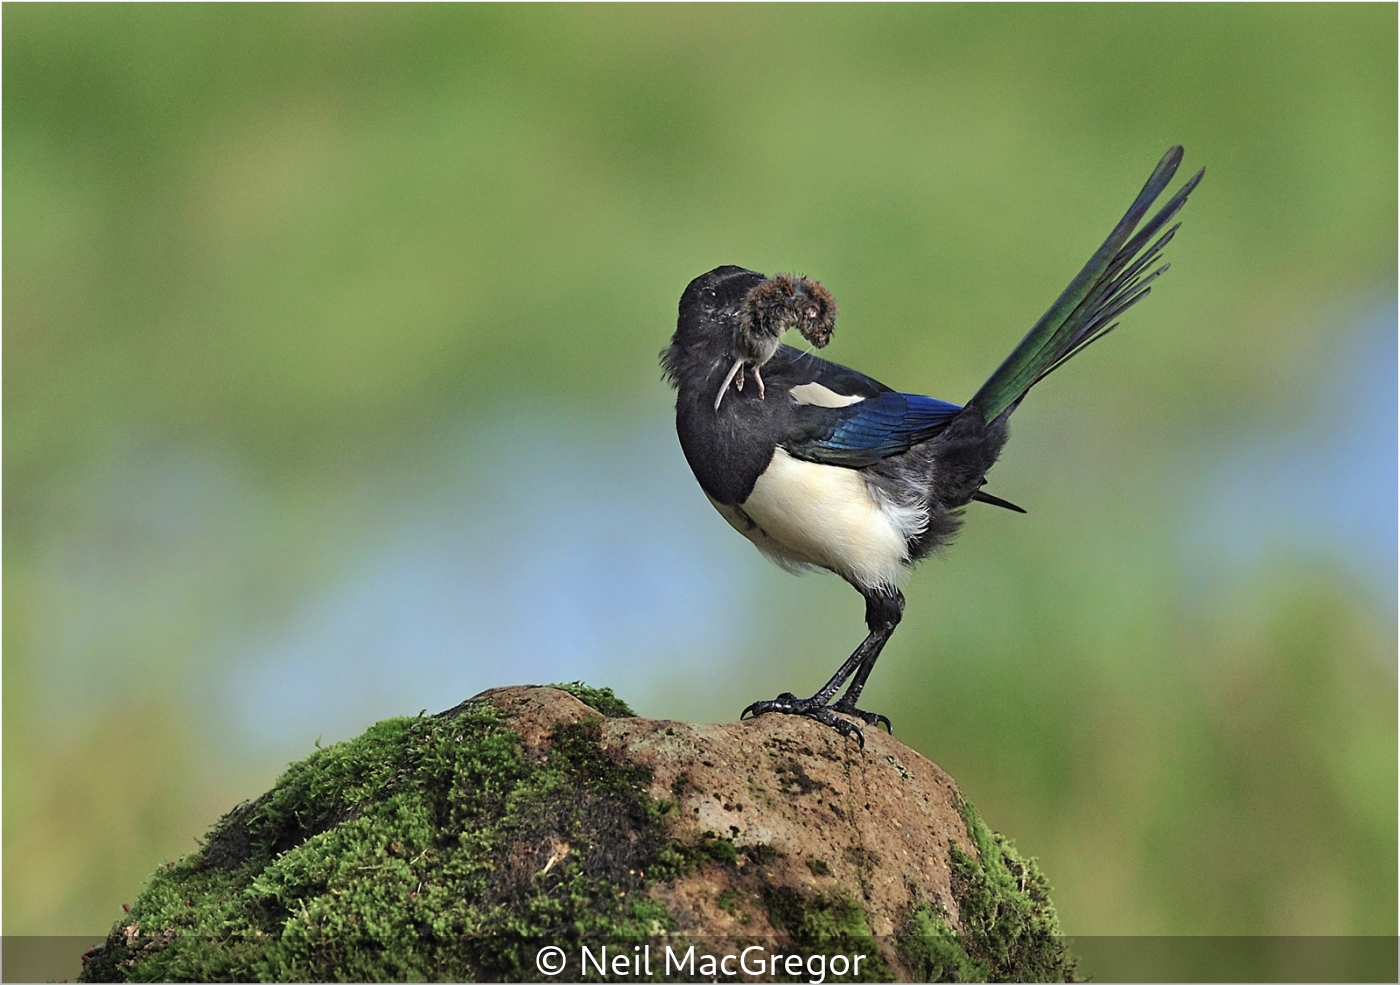 Neil MacGregor_Magpie With Short Tailed Vole